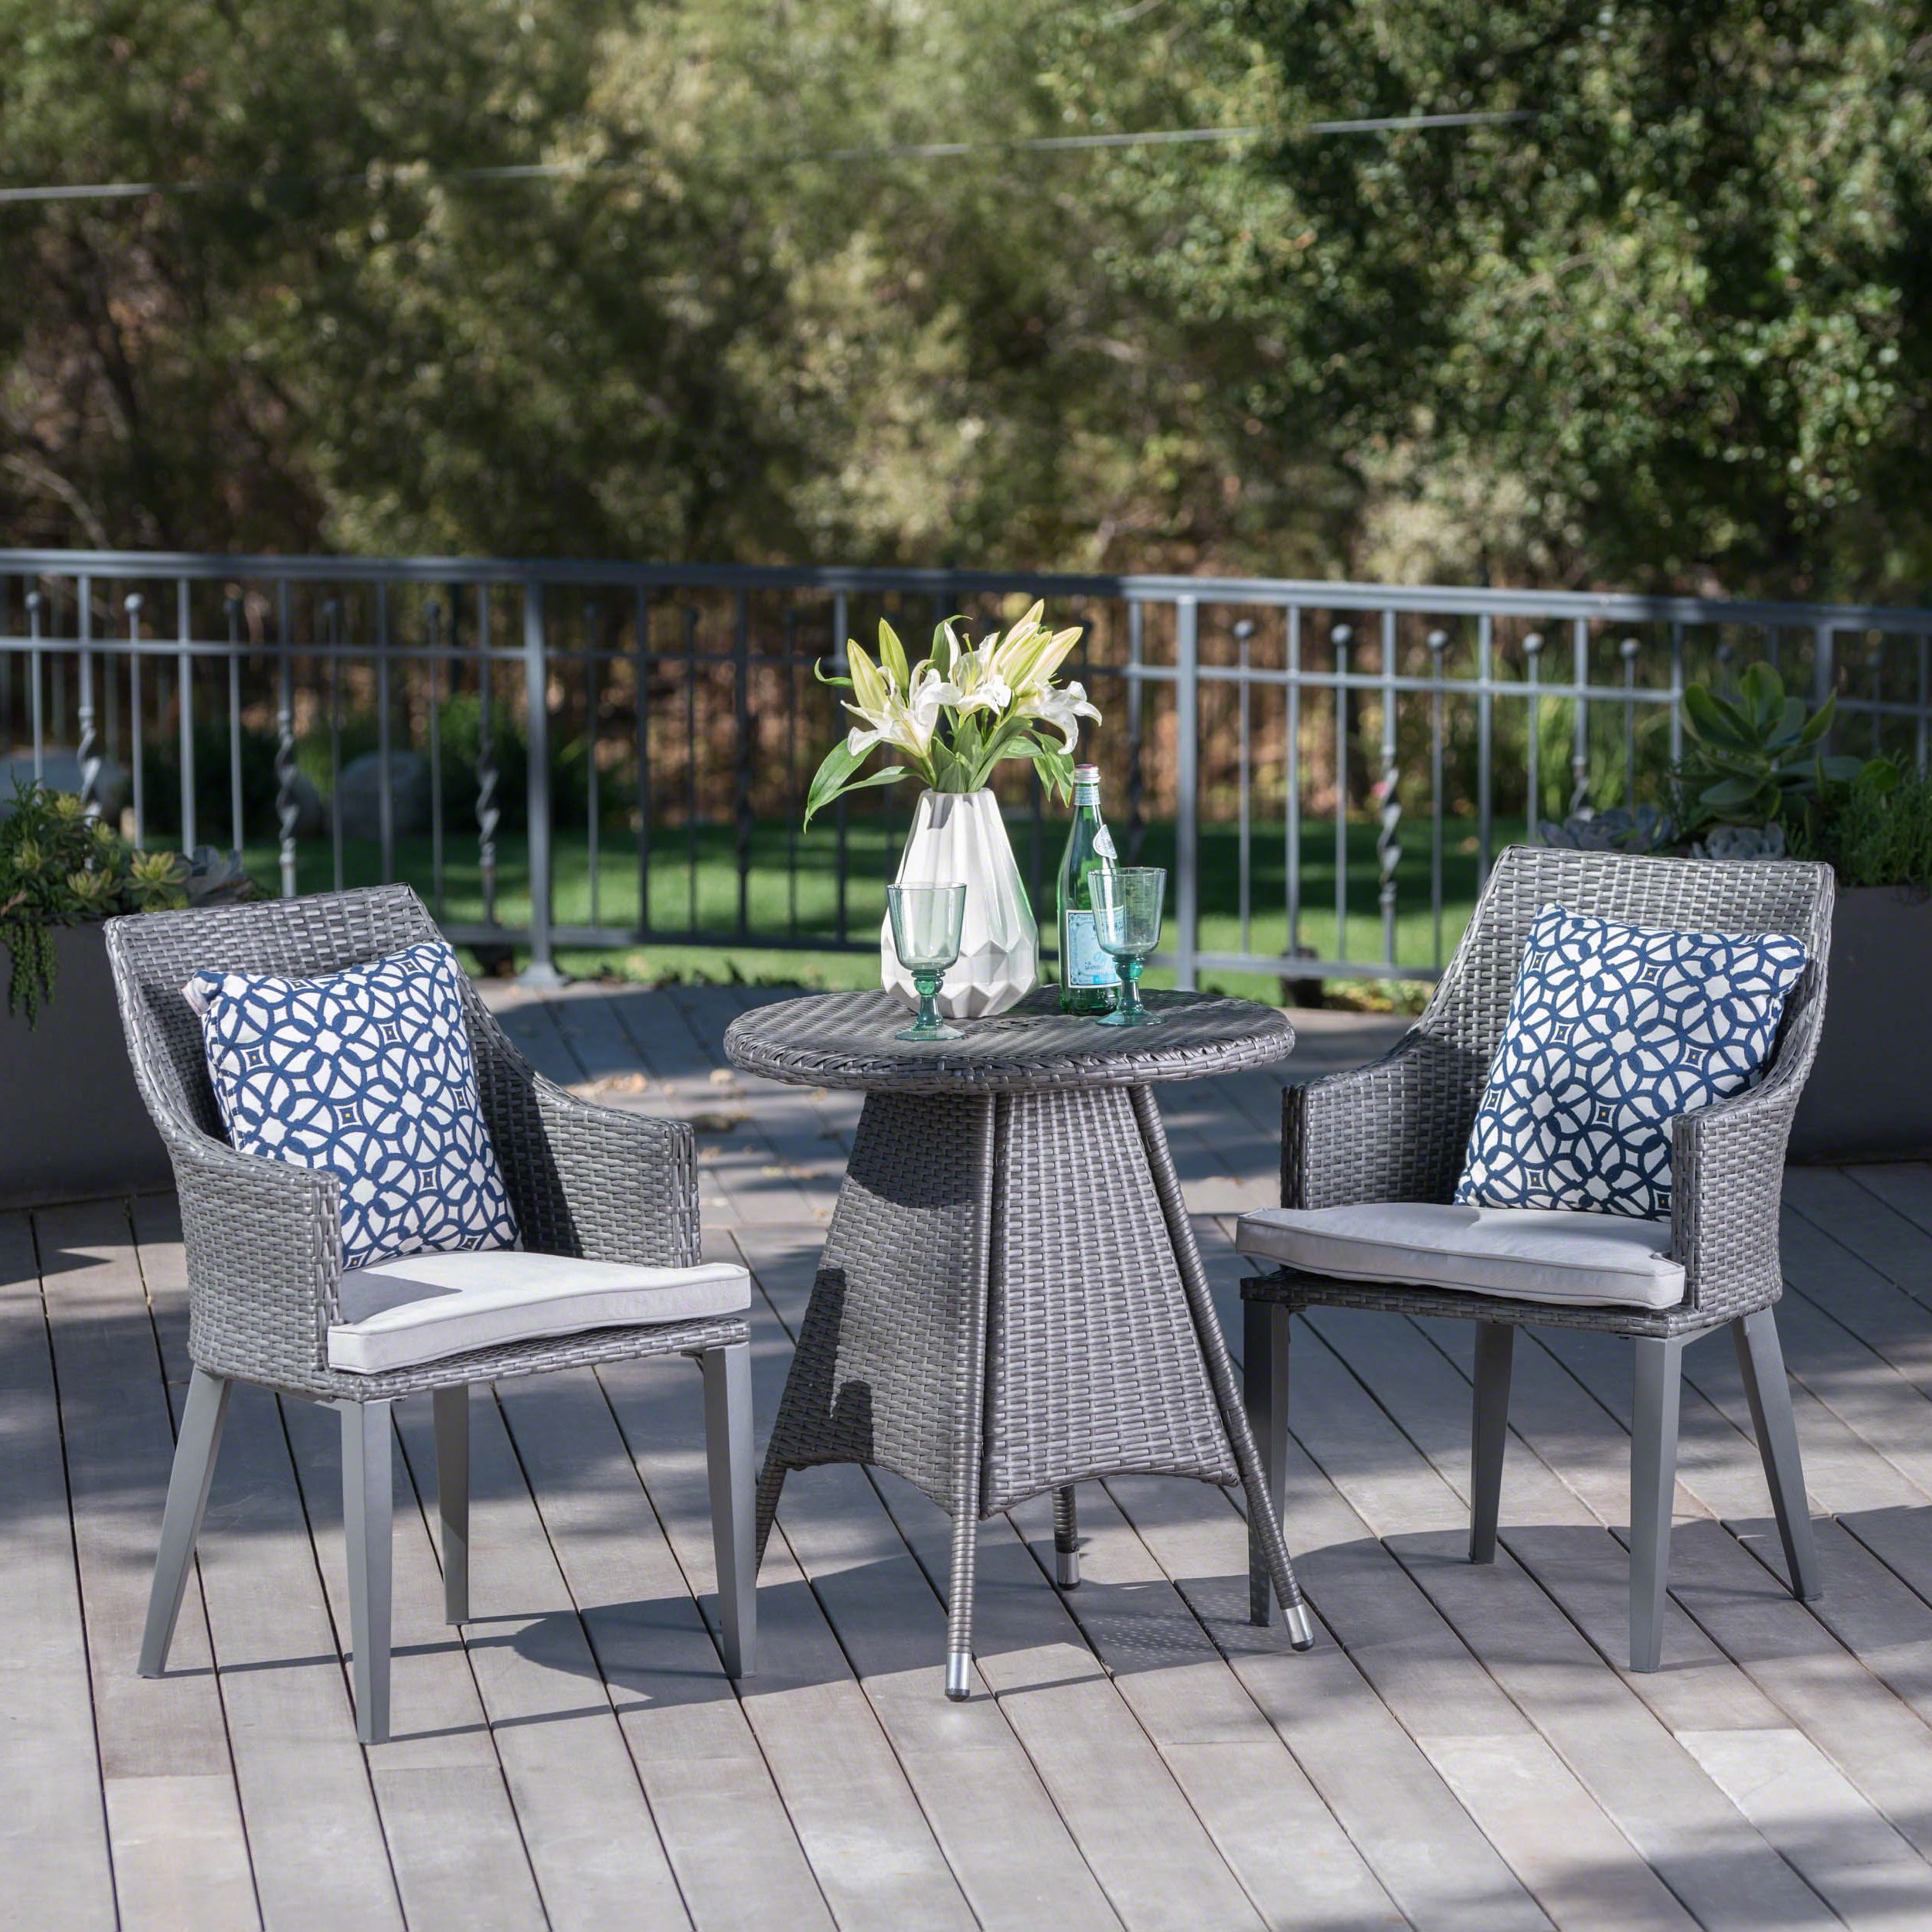 Outdoor Wicker Cafe Dining Sets Within 2019 Hillsdale Outdoor 3 Piece Wicker Round Bistro Set With Cushions, Grey (View 1 of 15)